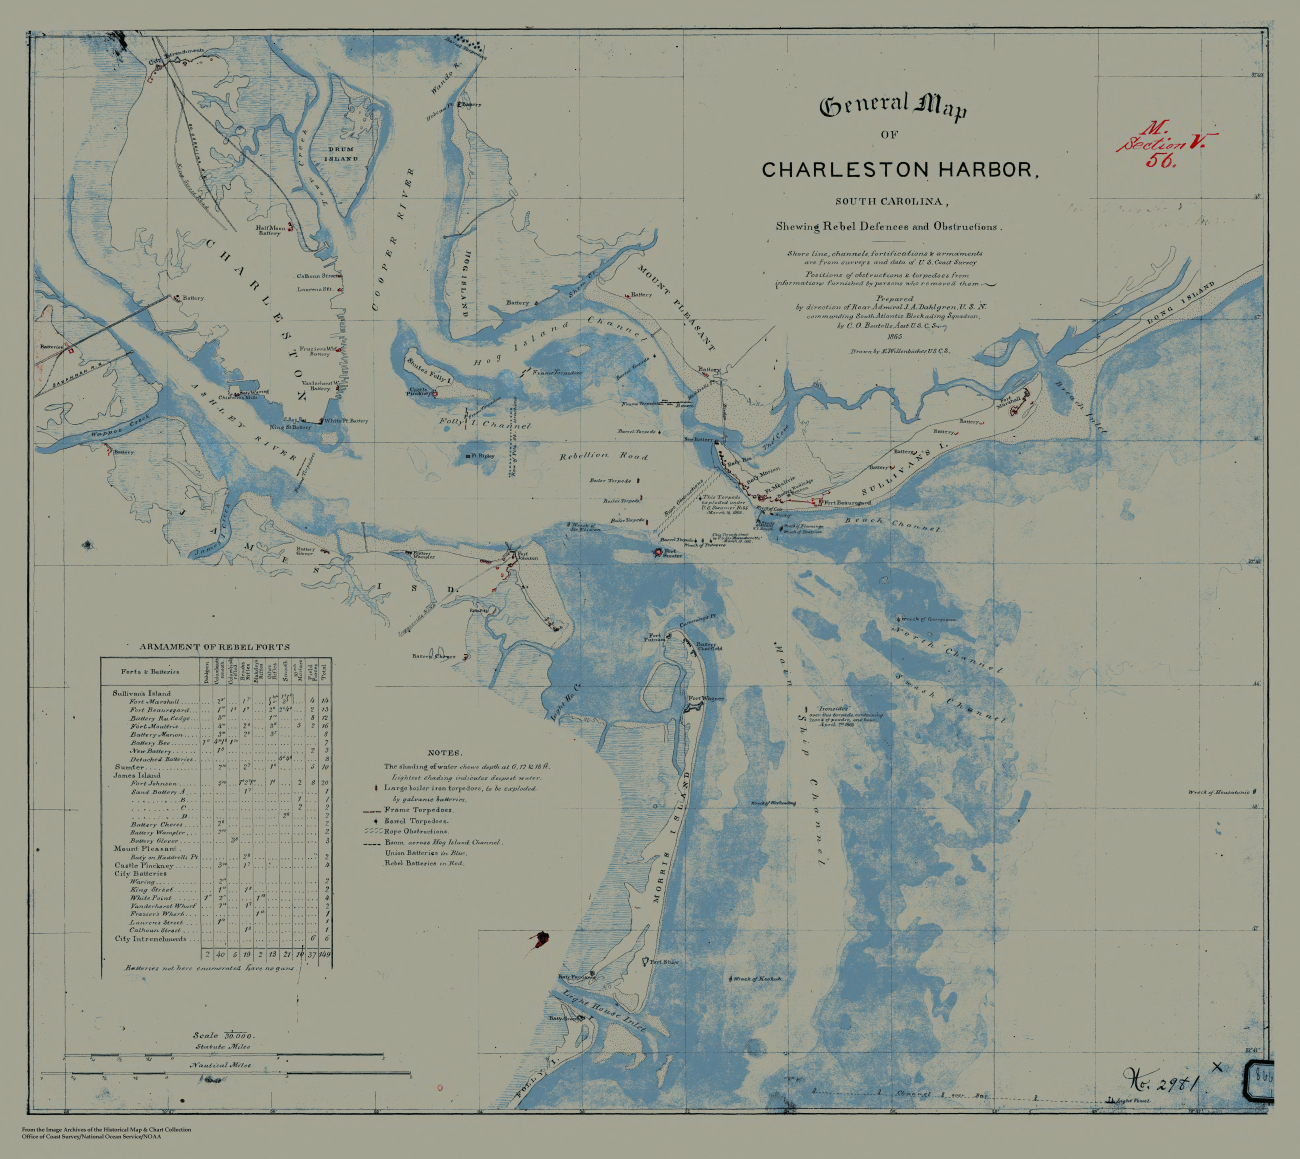 General Map of Charleston Harbor showing Rebel Defences and Obstructionsprepared by party under Charles Boutelle, Asst